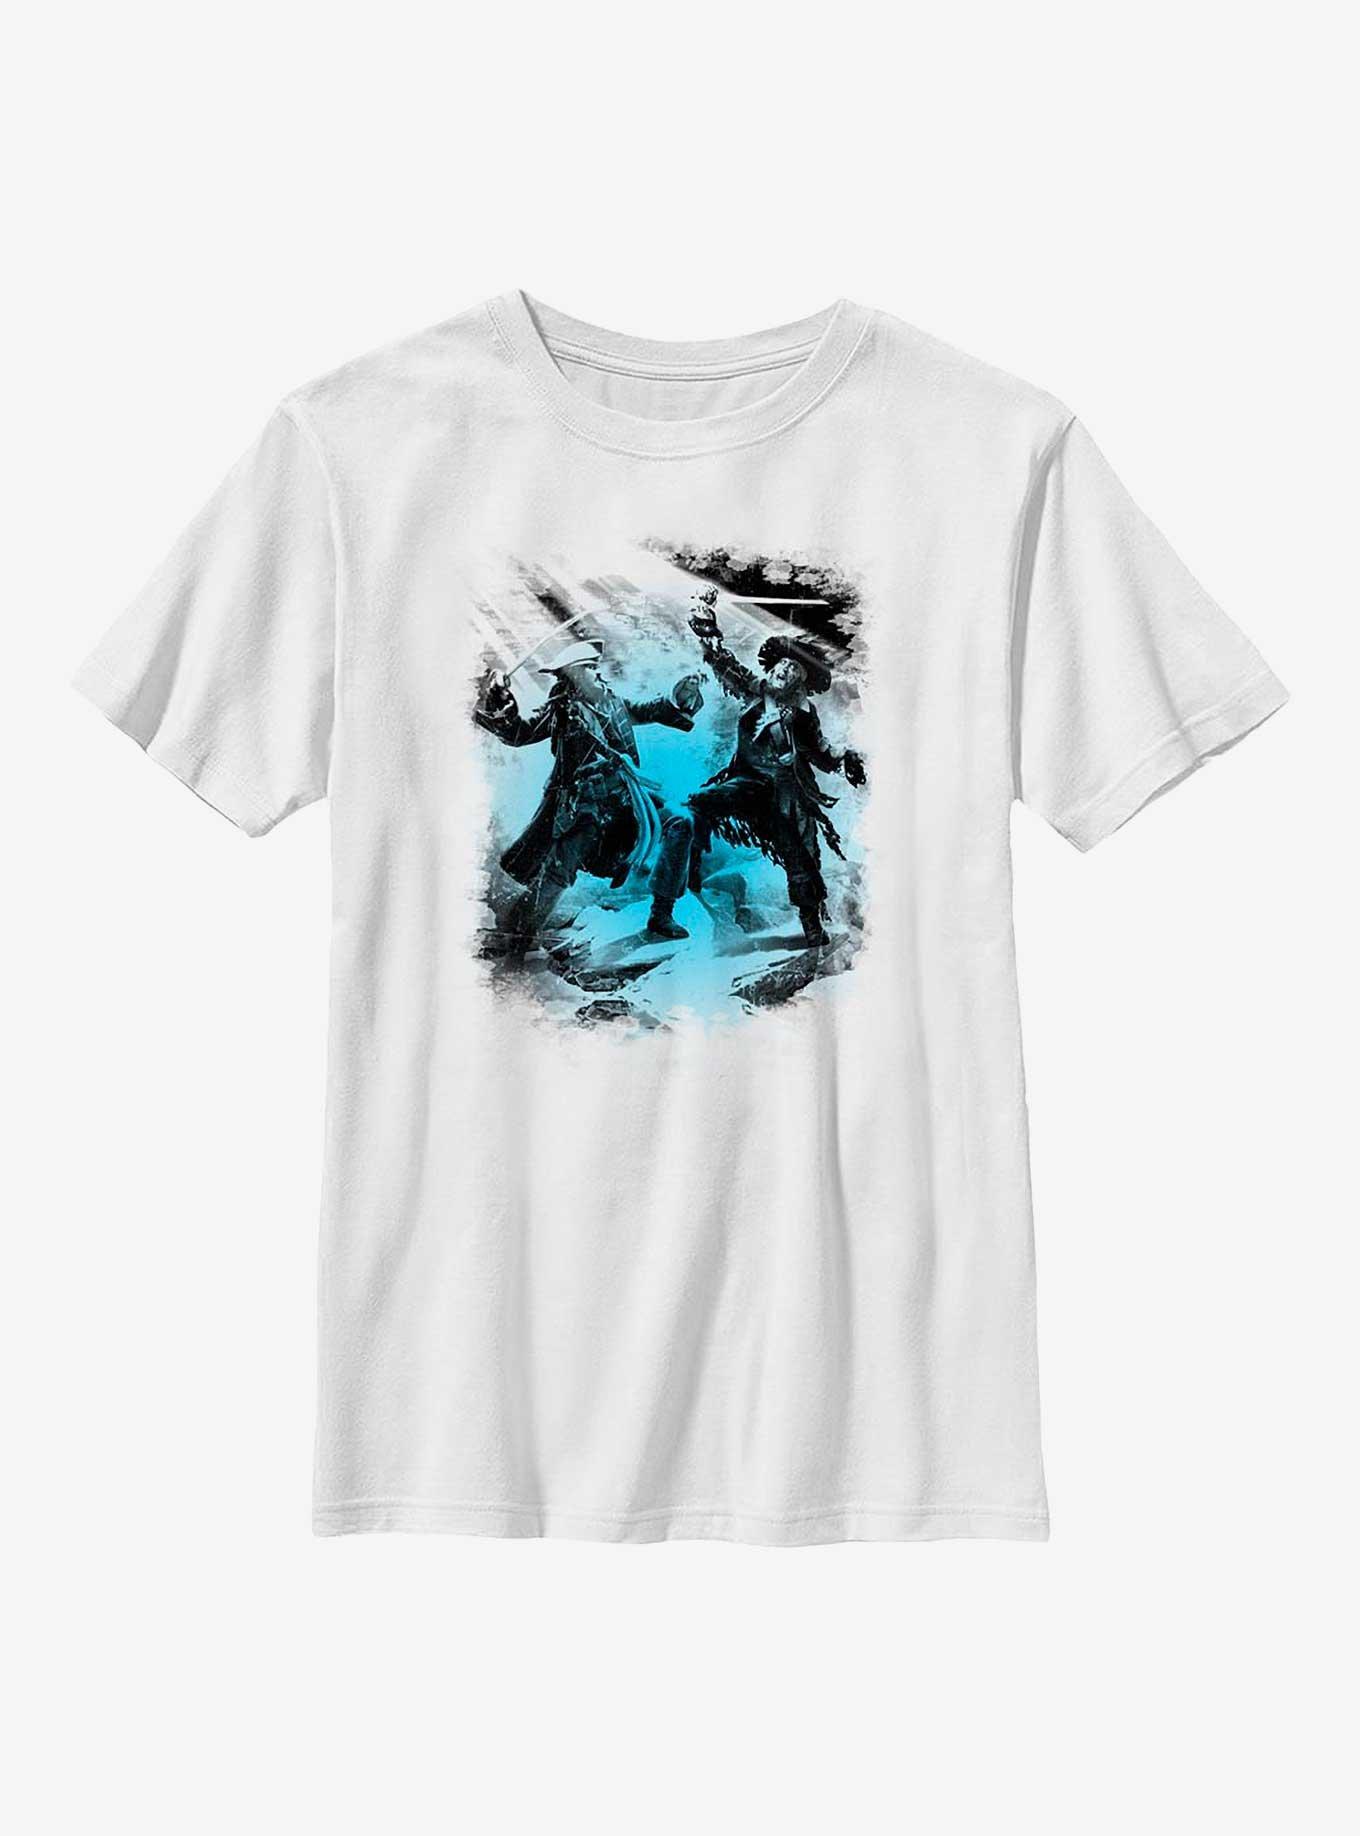 Disney Pirates Of The Caribbean Captain Fight Youth T-Shirt, WHITE, hi-res